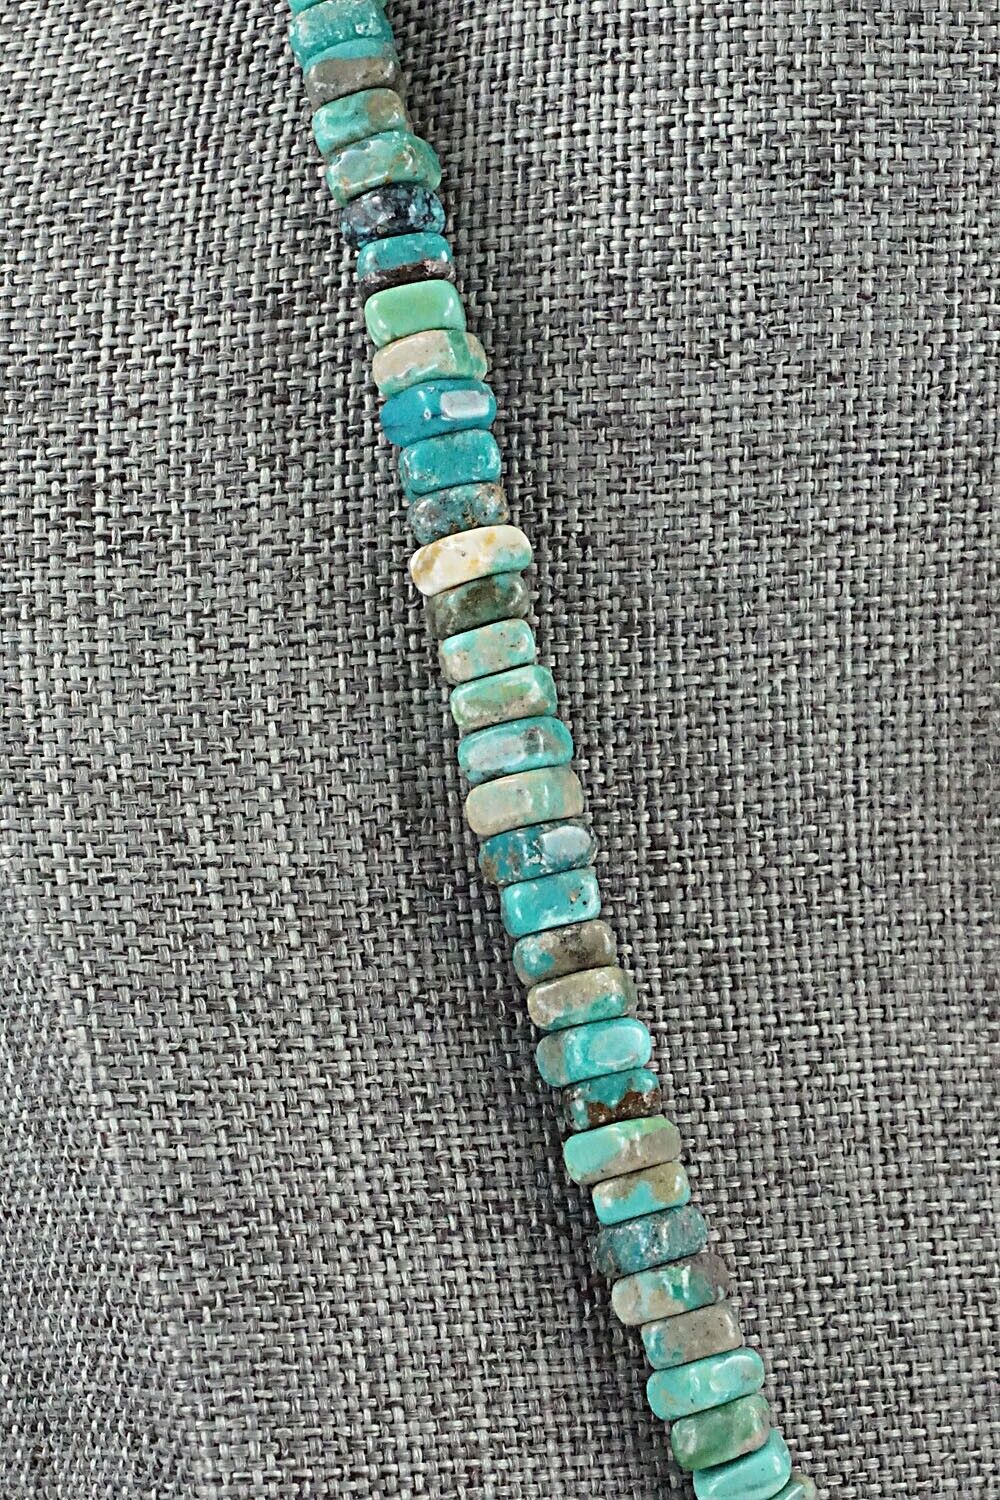 Turquoise & Sterling Silver Necklace 18" - Doreen Jake